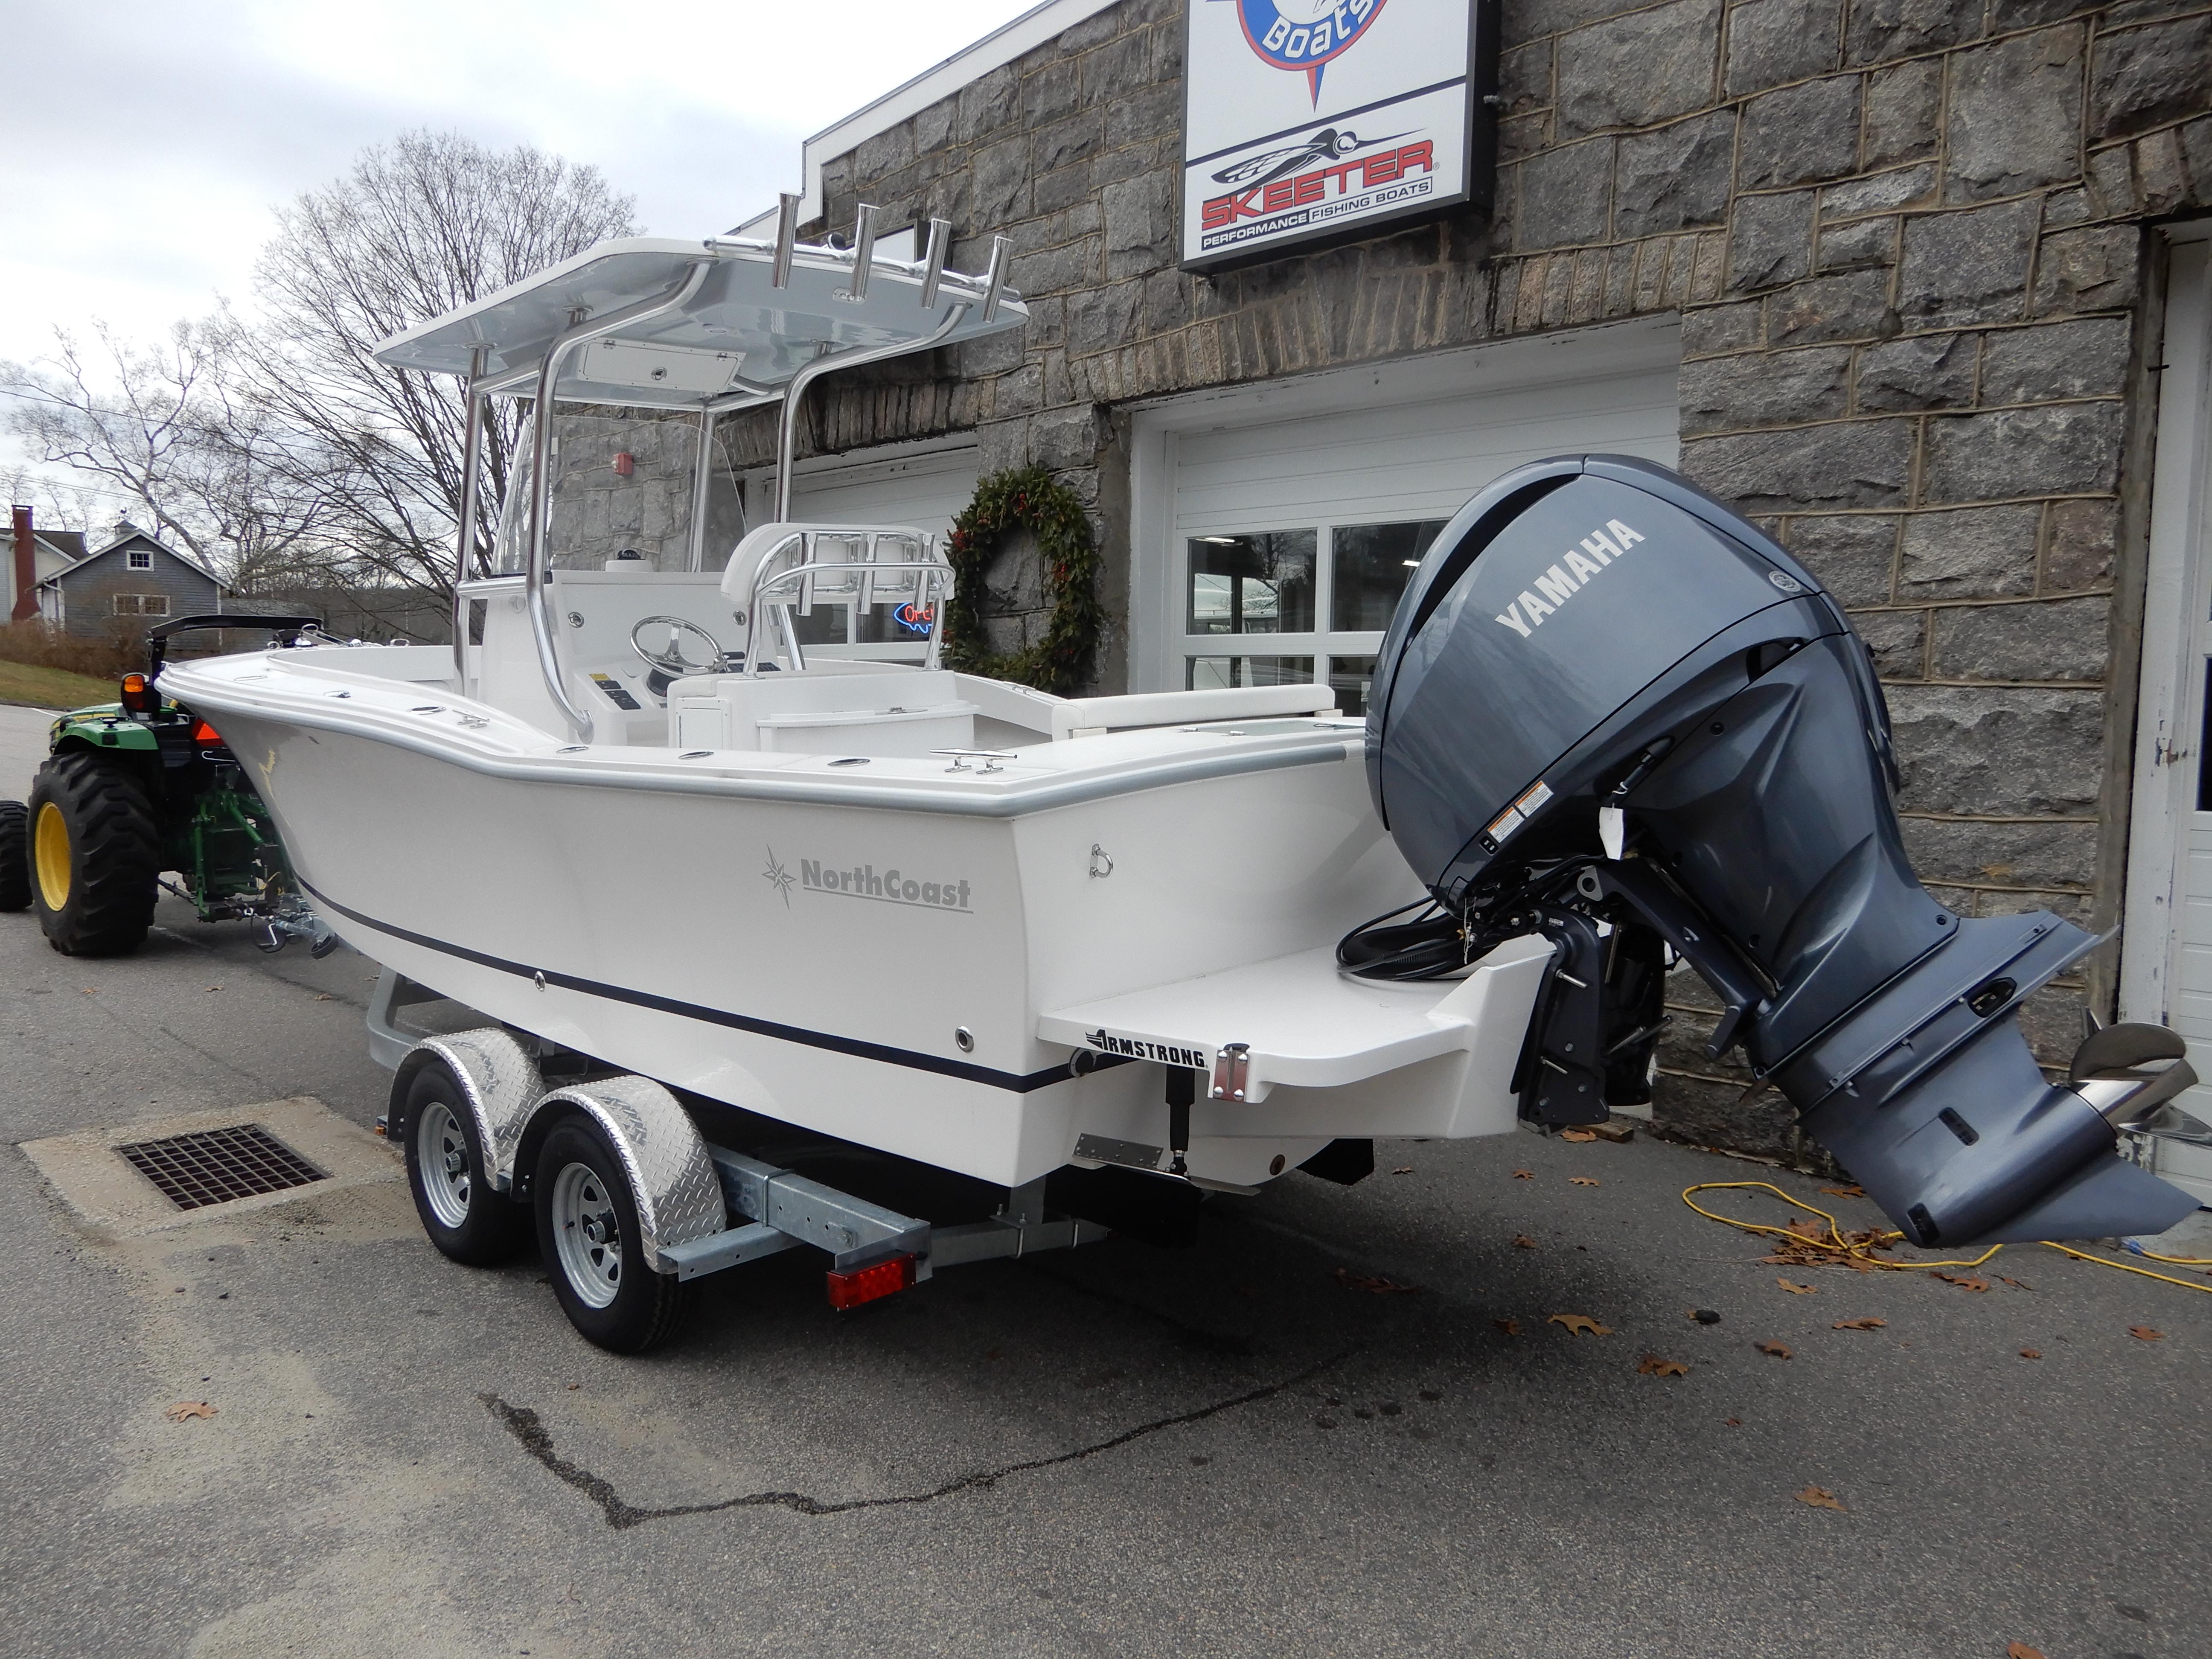 Page 15 of 102 - Power boats for sale in Lyme, Connecticut - boats.com